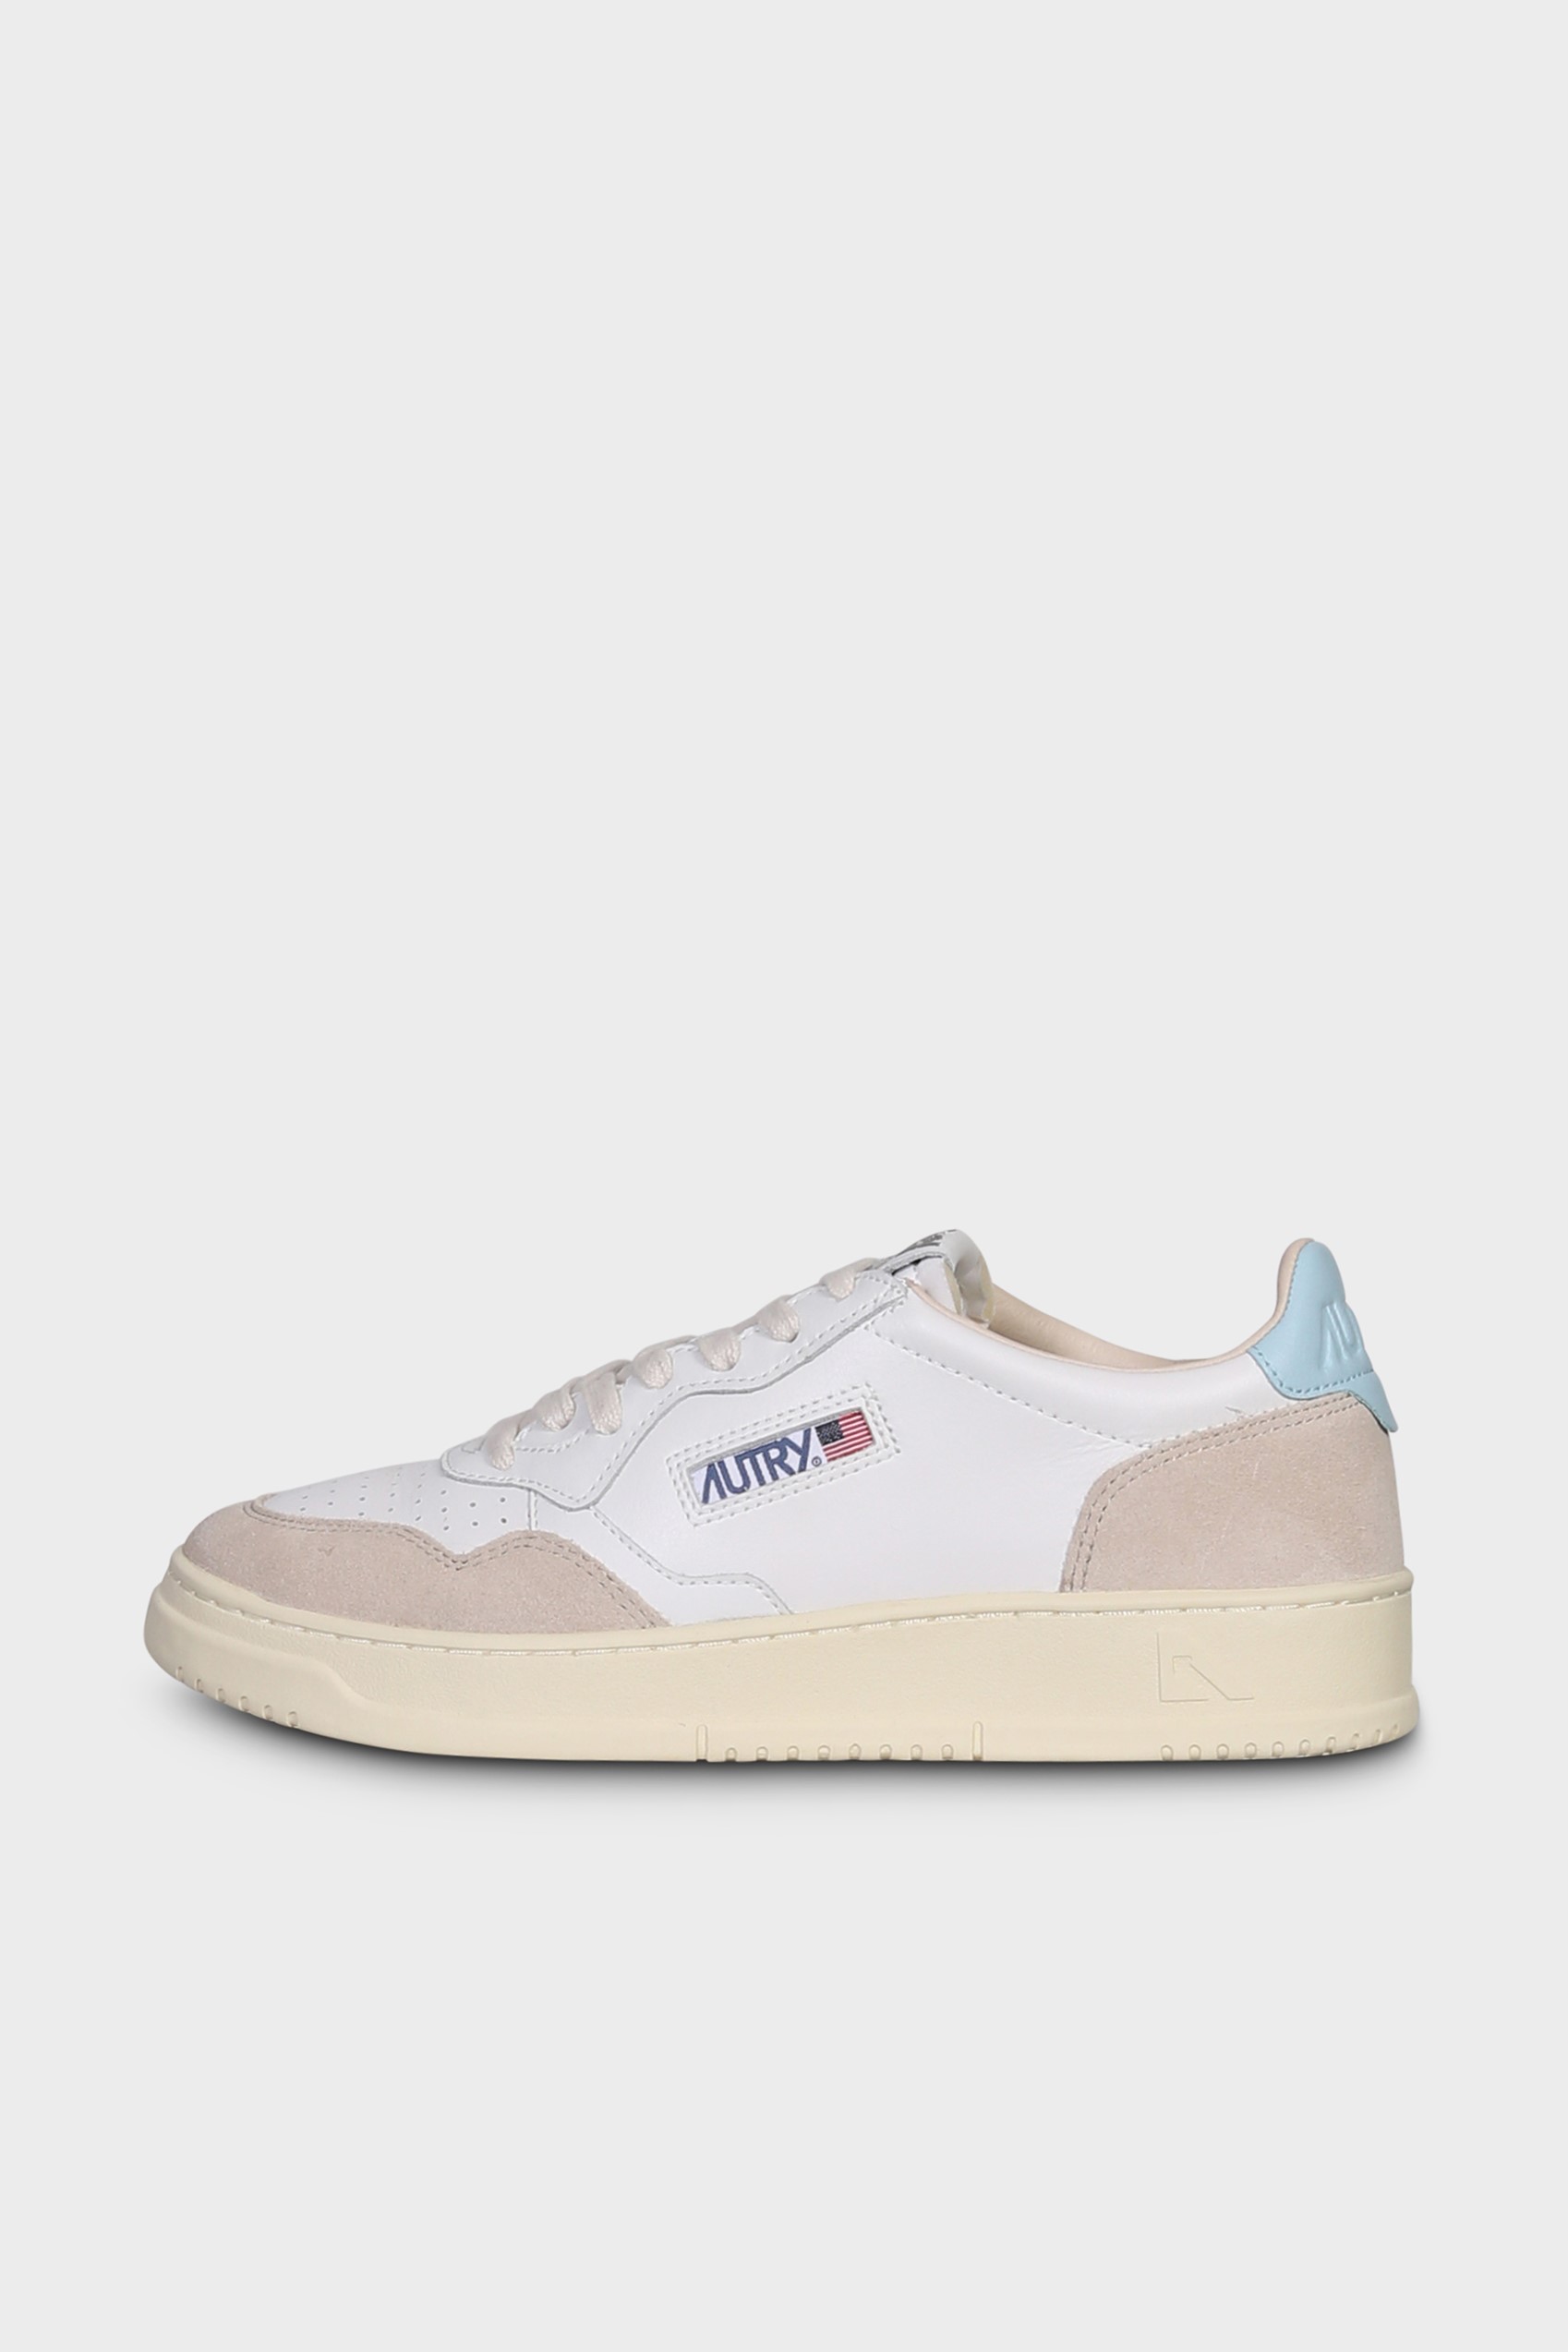 AUTRY ACTION SHOES Medalist Low Sneaker Suede White/Stream Blue